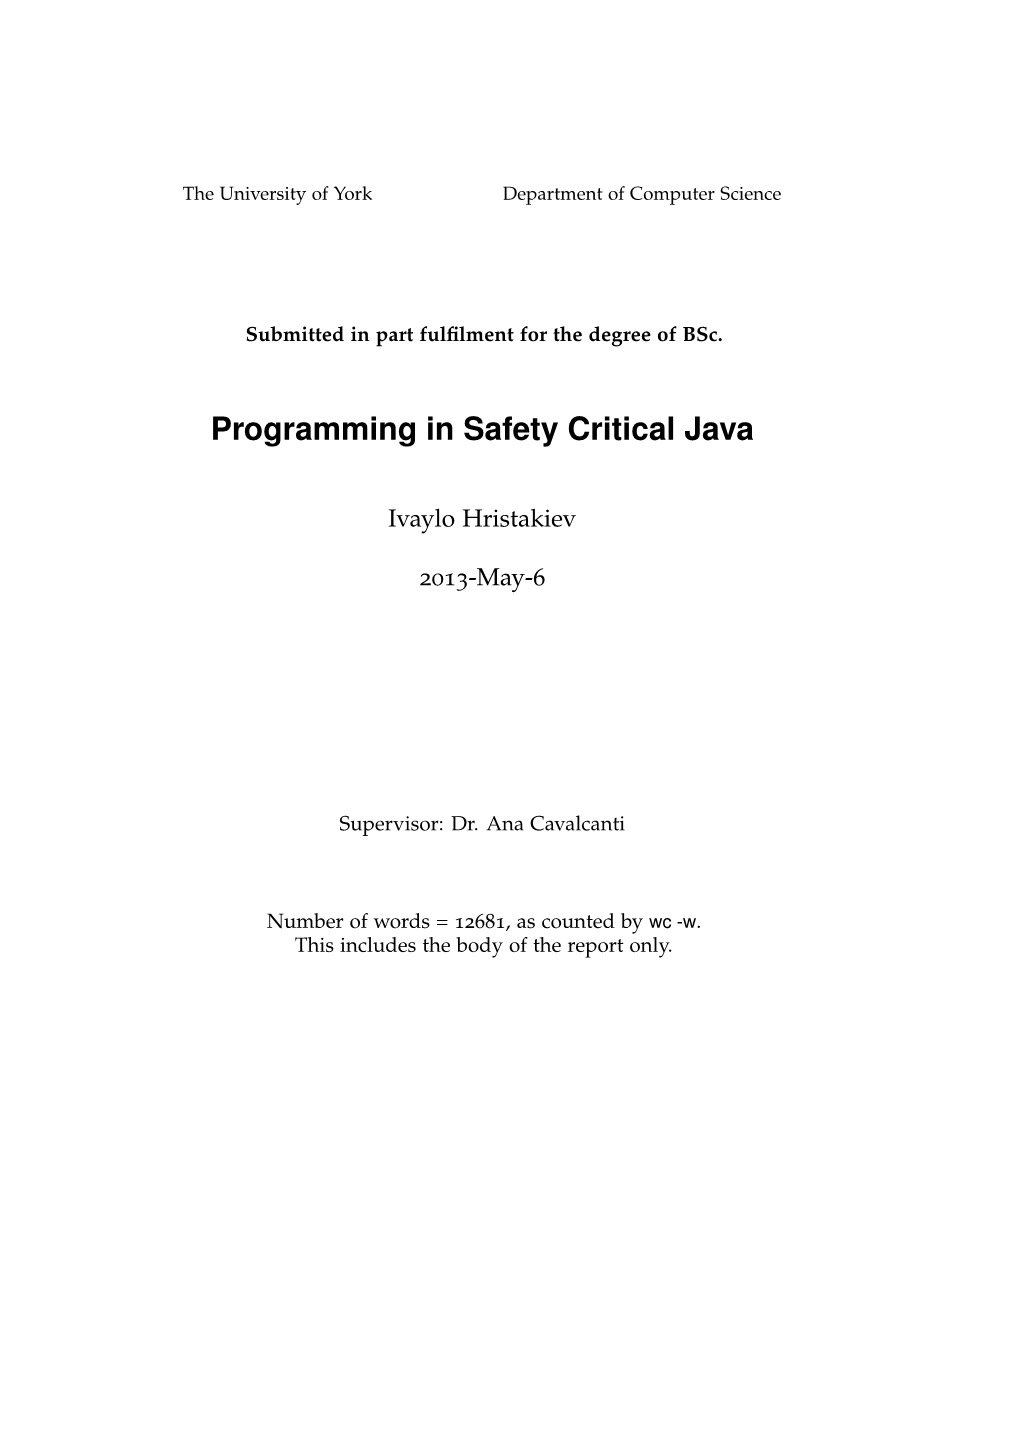 Programming in Safety Critical Java